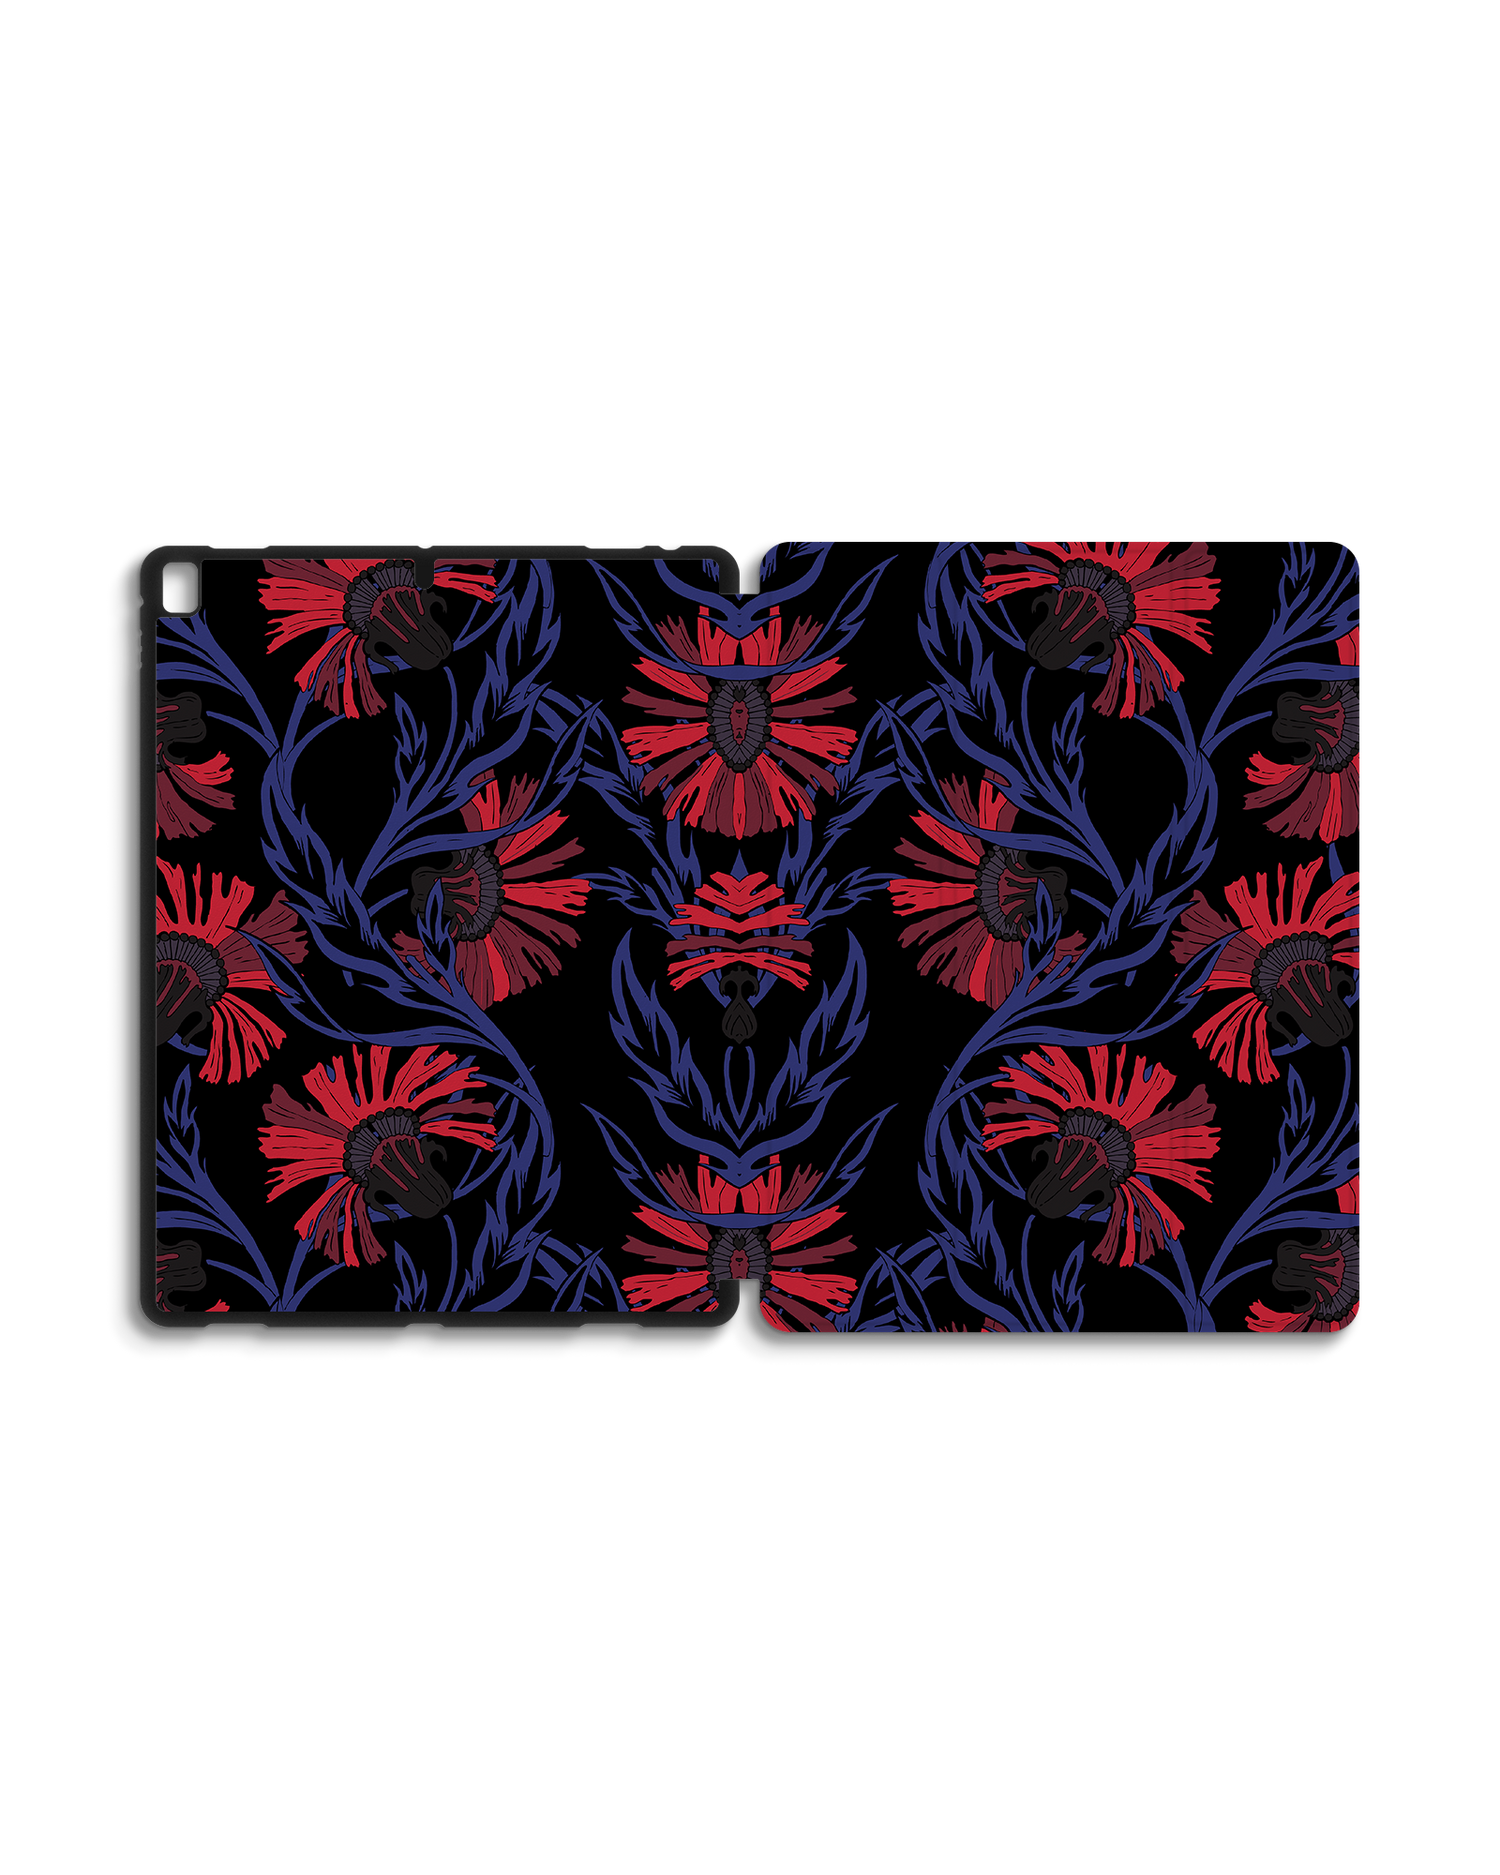 Midnight Floral iPad Case with Pencil Holder for Apple iPad Pro 2 12.9